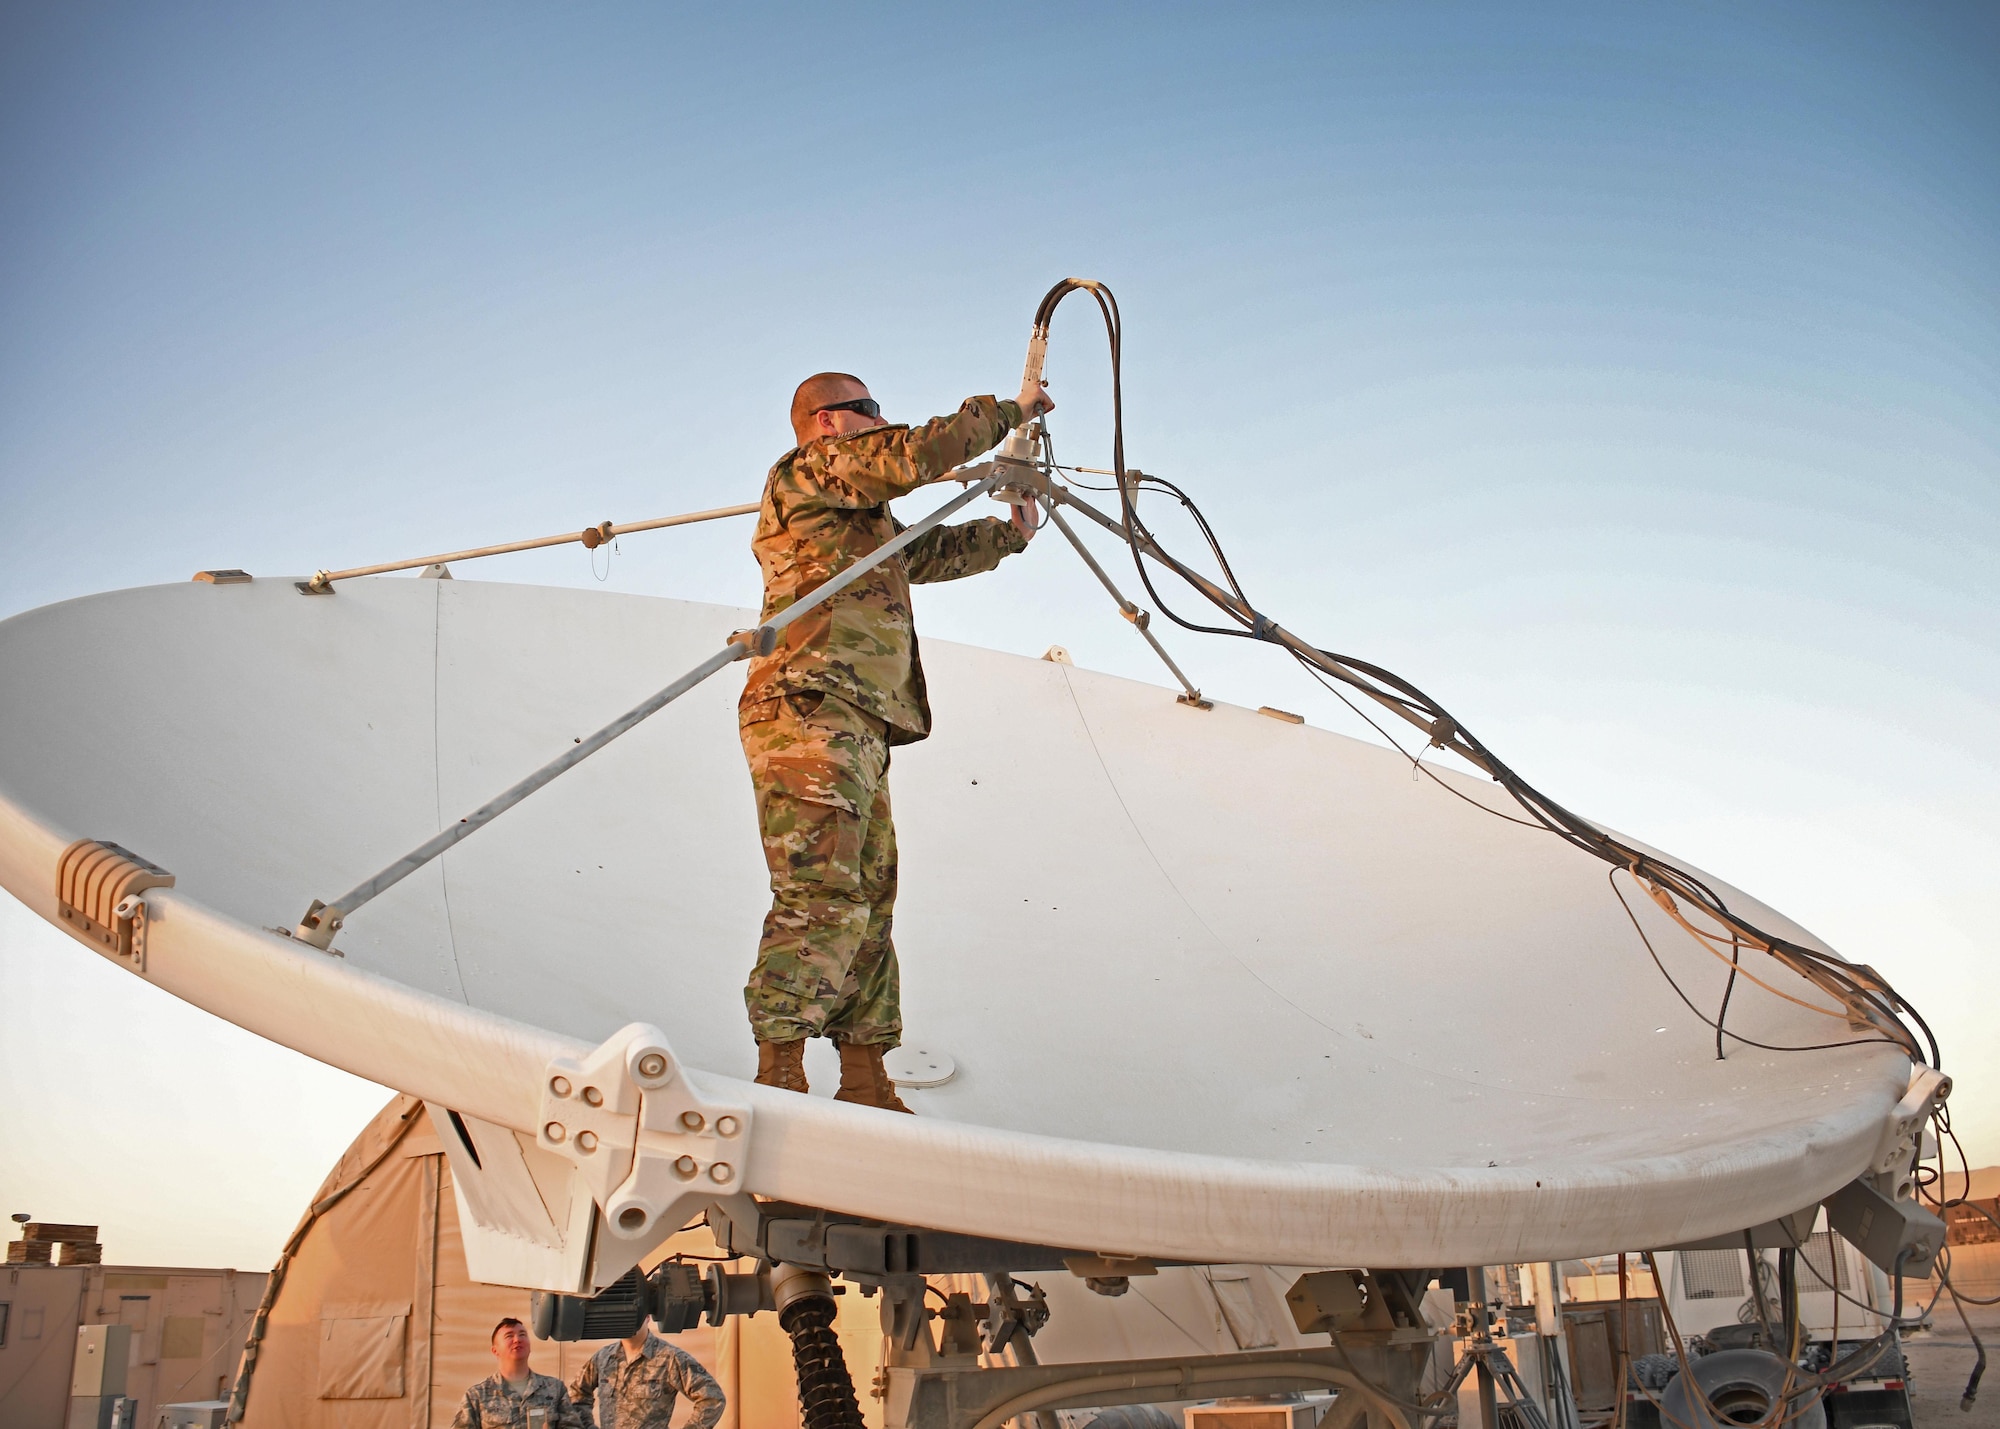 U.S. Air Force Staff Sgt. Jeff Schumacher, a Raiders Deployable Ground Segment-0 crew chief with the 379th Expeditionary Operations Support Squadron, attaches a low noise amplifier to an antenna at Al Udeid Air Base, Qatar, Jan. 30, 2017. These antennas are used in Operation Silent Sentry and help detect and geolocate electromagnetic interference to signals of interest. (U.S. Air Force photo by Senior Airman Miles Wilson)